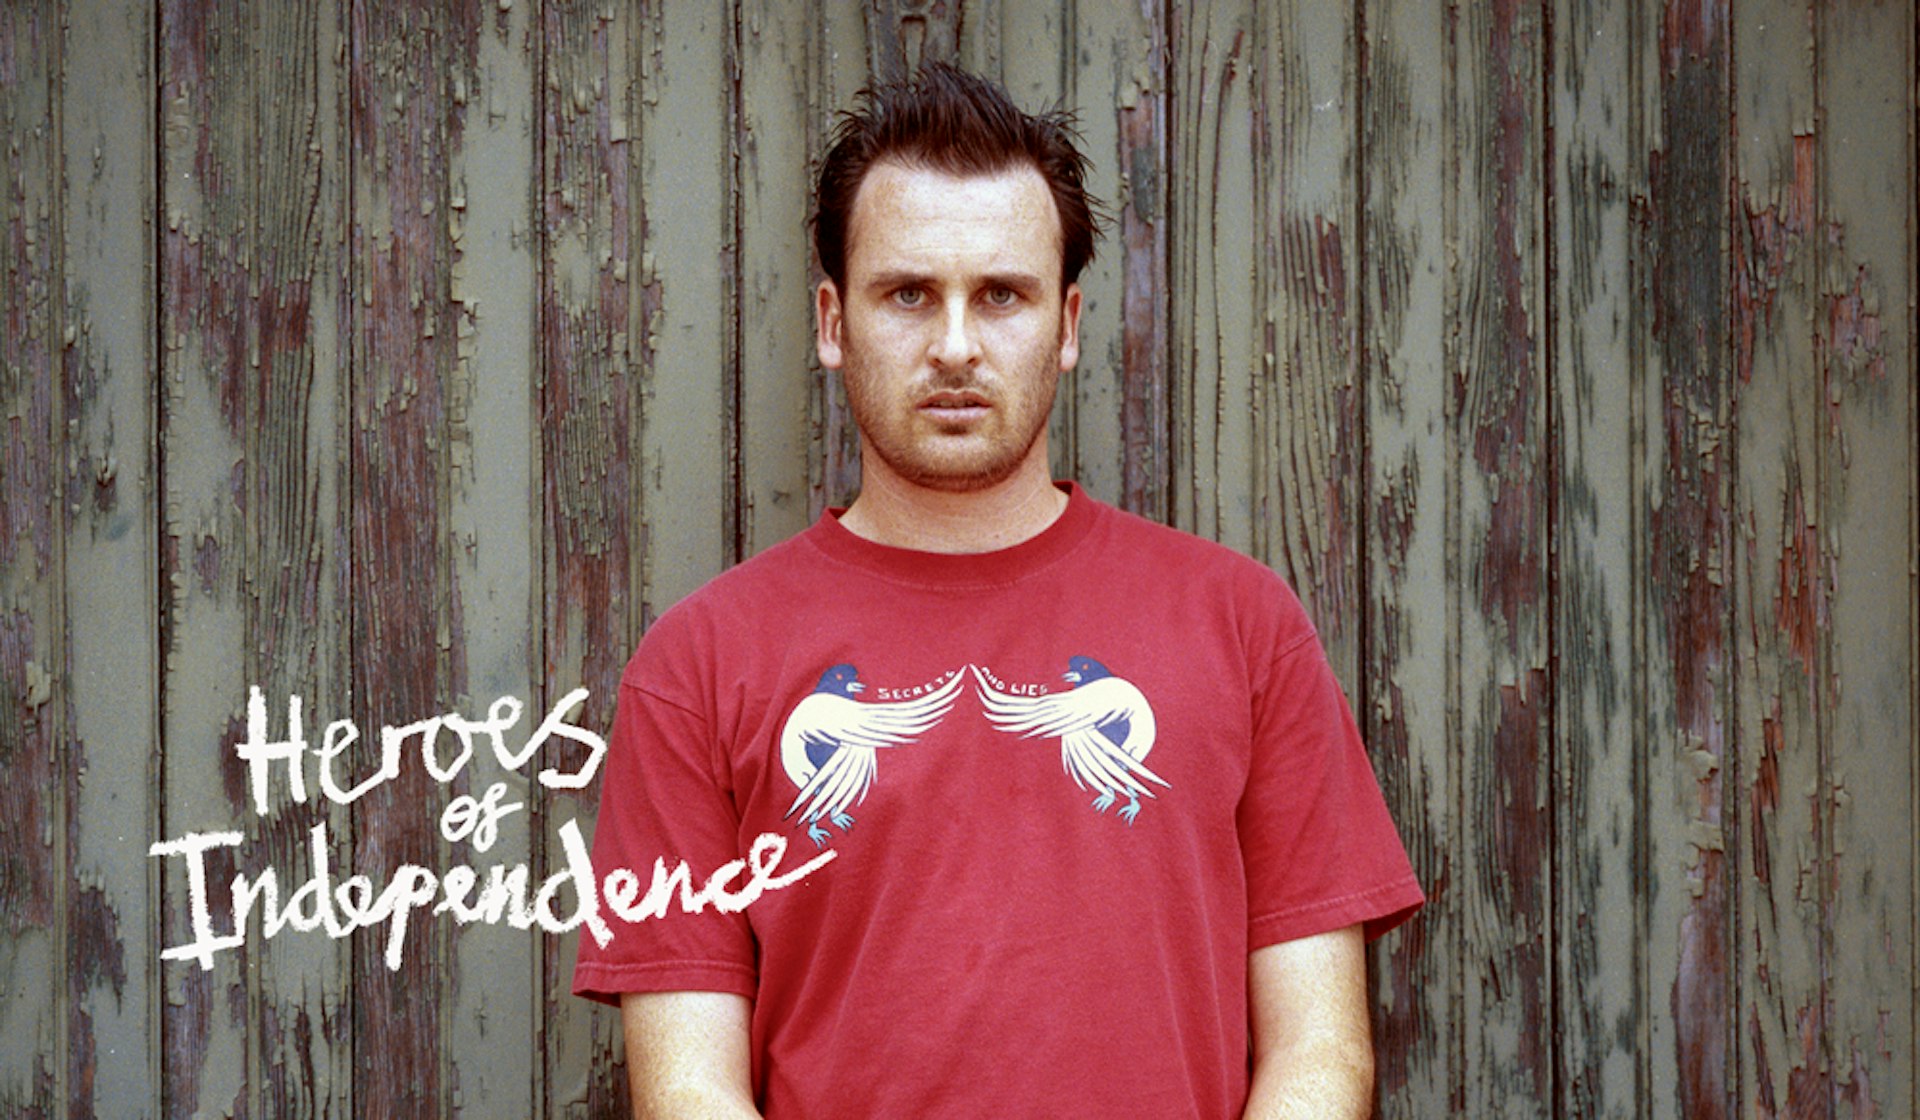 Ed Templeton's guide to independent thinking